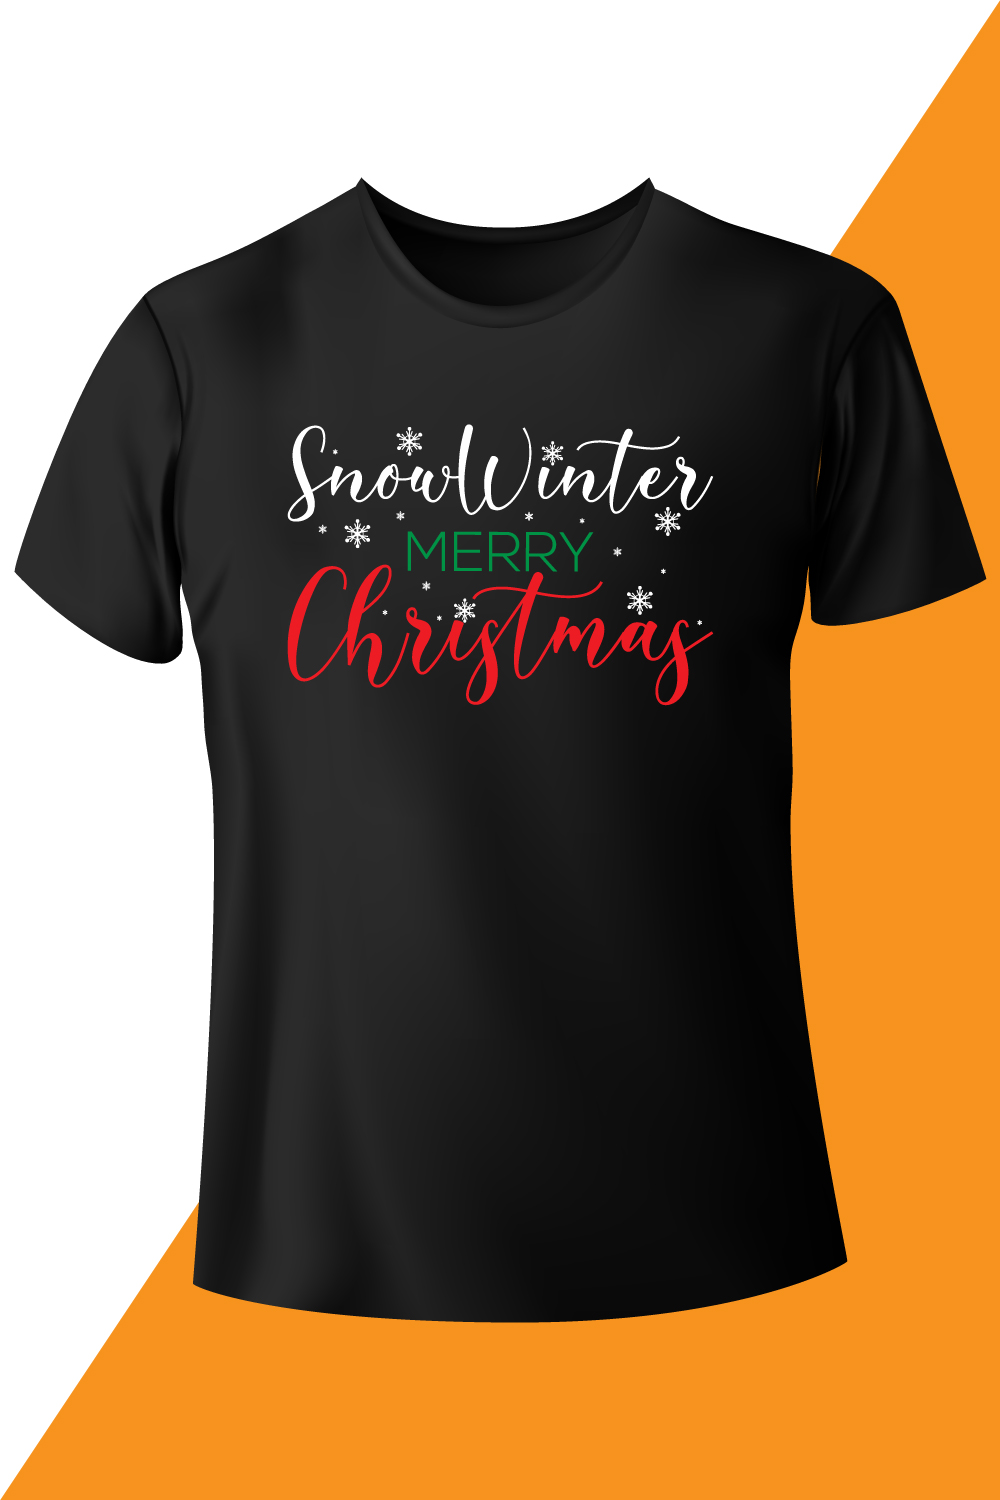 Image of black t-shirt with wonderful print snow winter merry christmas.